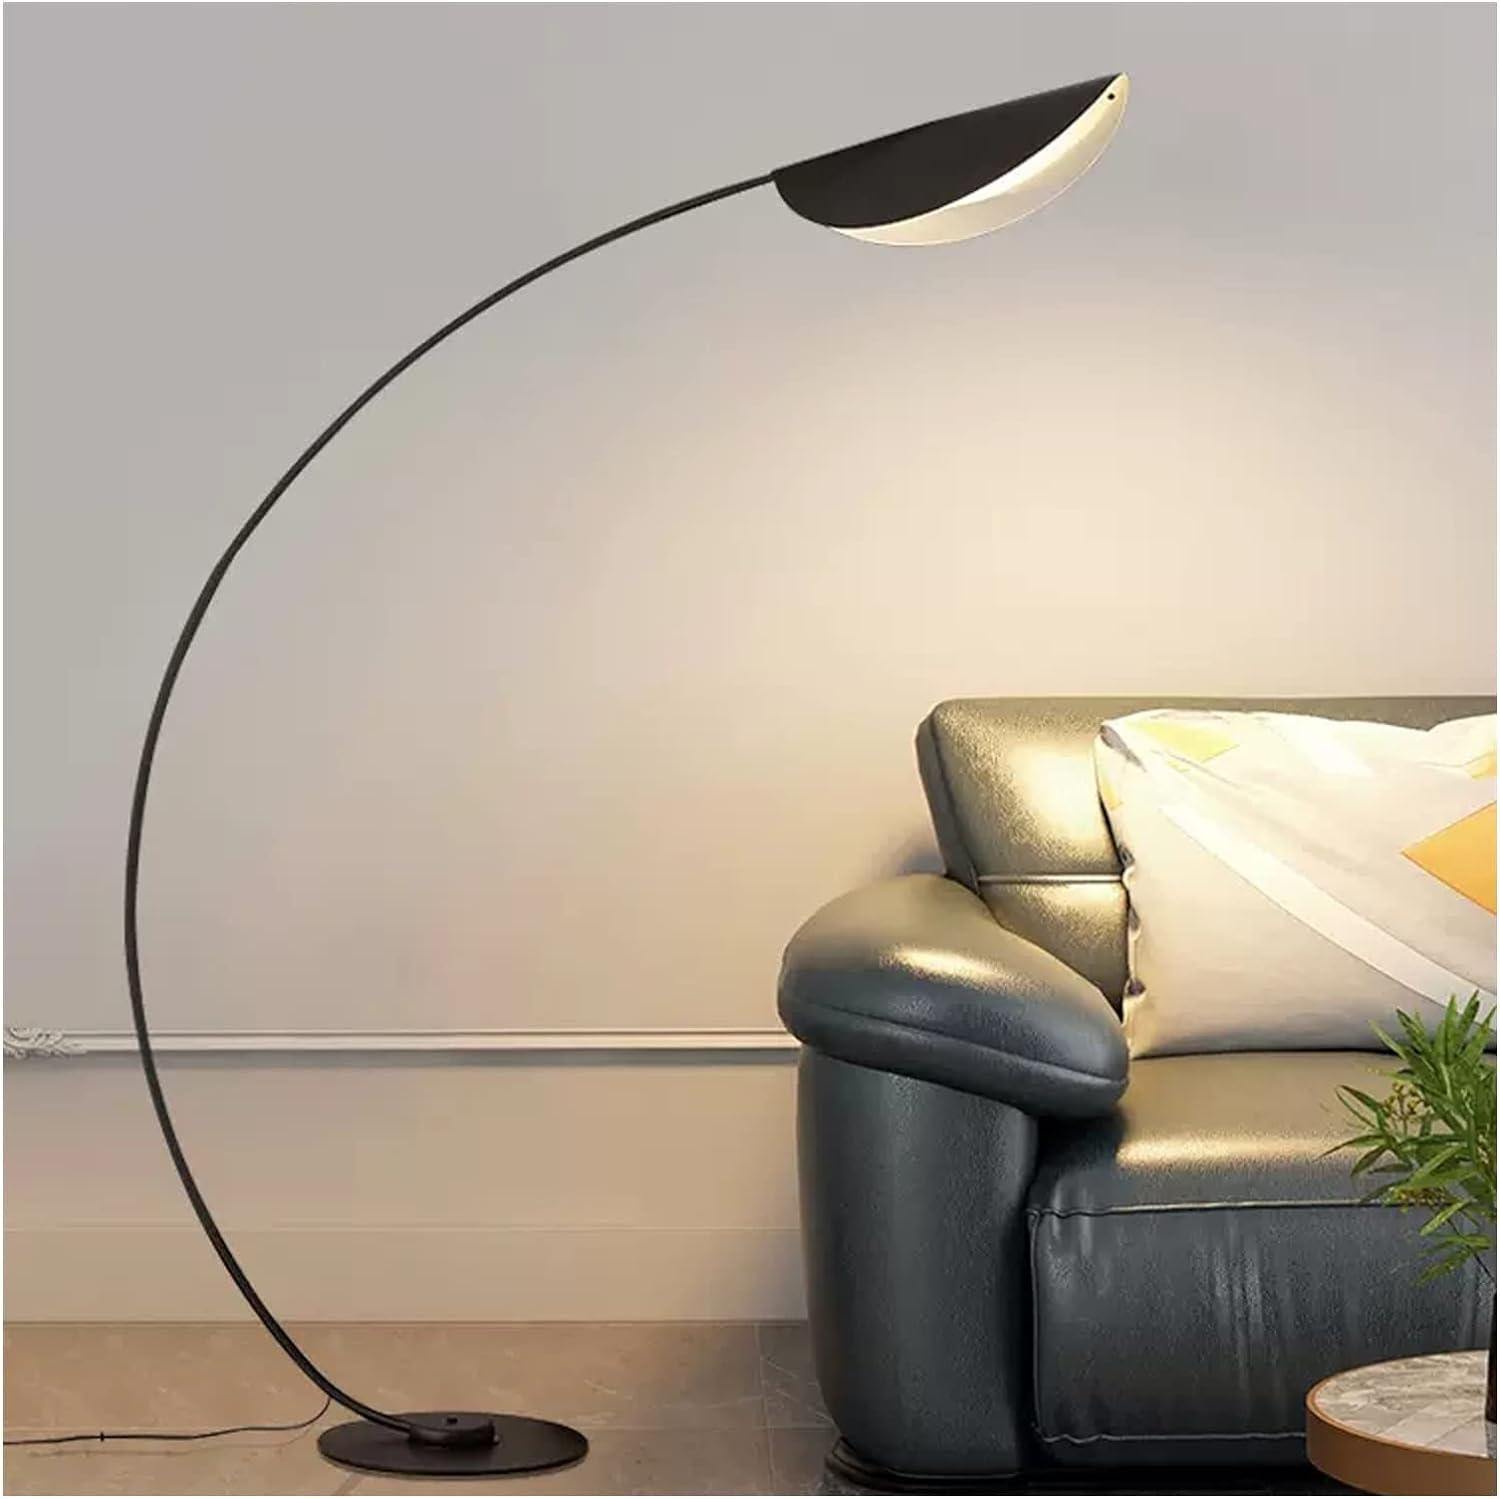 Buy Modern Floor Standing Lamp Light - A49 | Shop at Supply Master Accra, Ghana Lamps & Lightings Buy Tools hardware Building materials